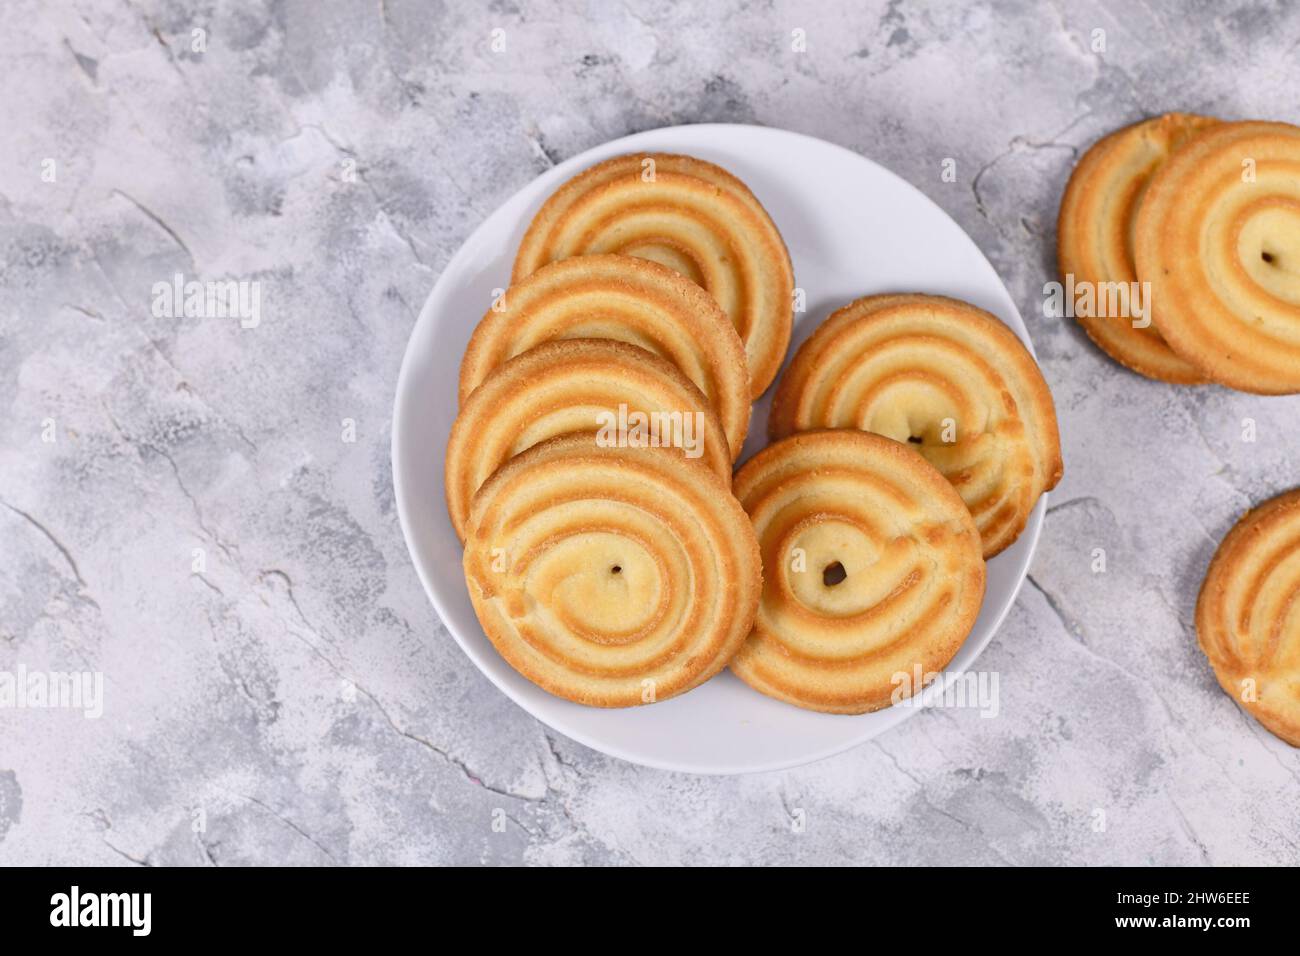 Top view of round ring shaped spritz biscuits, a type of German butter  cookies made by extruding dough with a press fitted with patterned holes  Stock Photo - Alamy